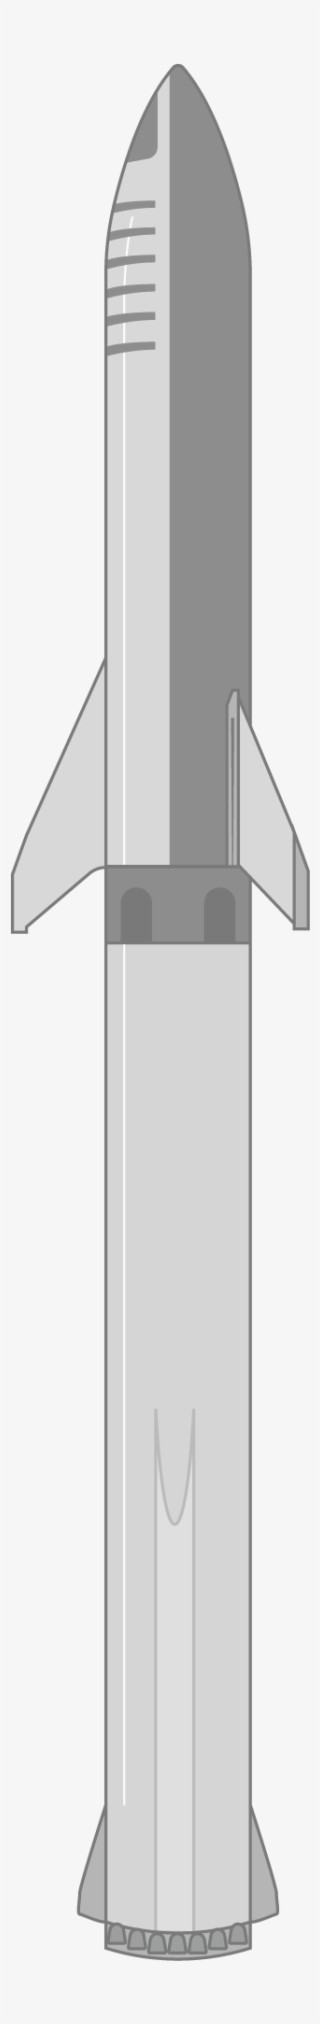 As Tall As - Spacex Starship